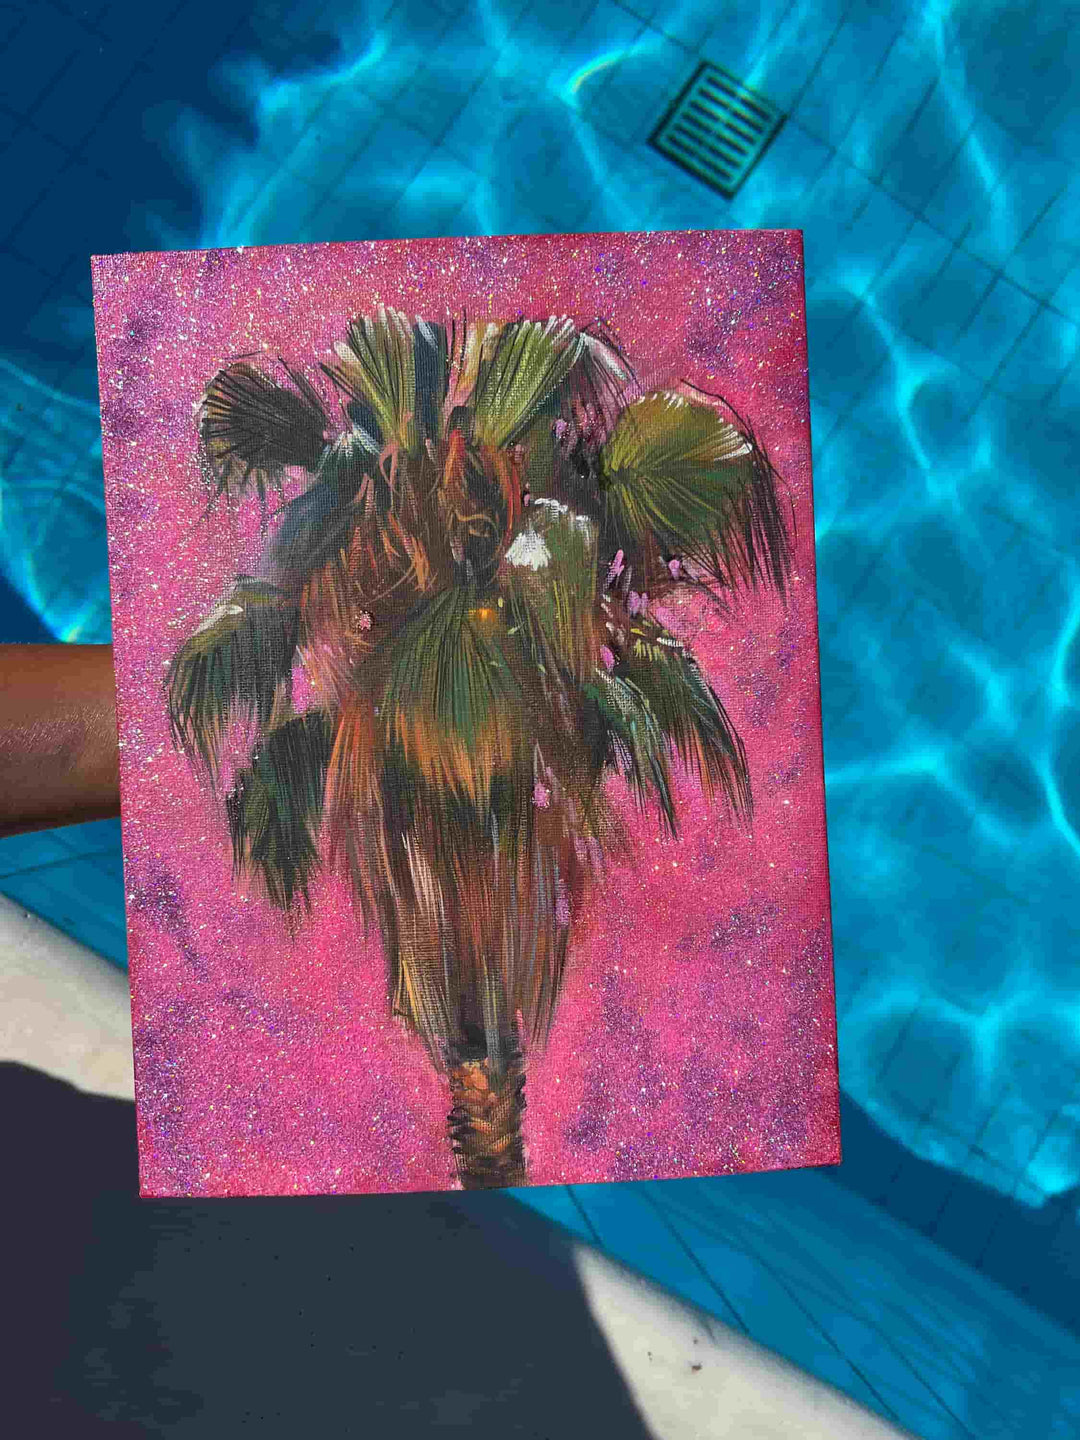 An overhead shot of a painting of a palm tree with a pink background as it is held above a sparkling blue swimming pool